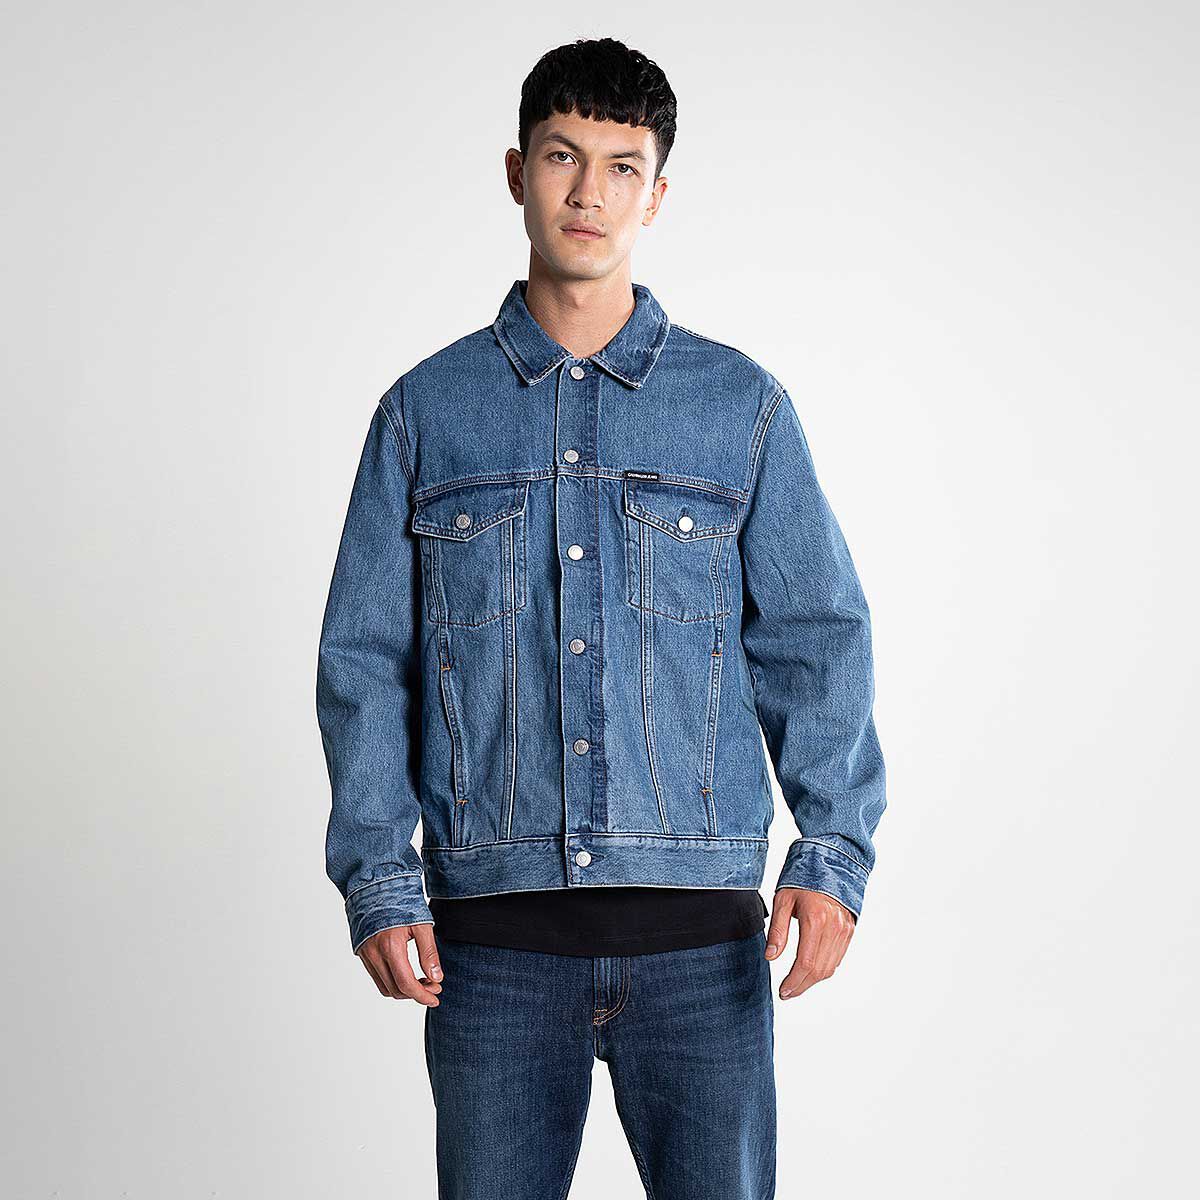 Calvin Klein Jeans Classic Luxembourg, SAVE 52% - mpgc.net